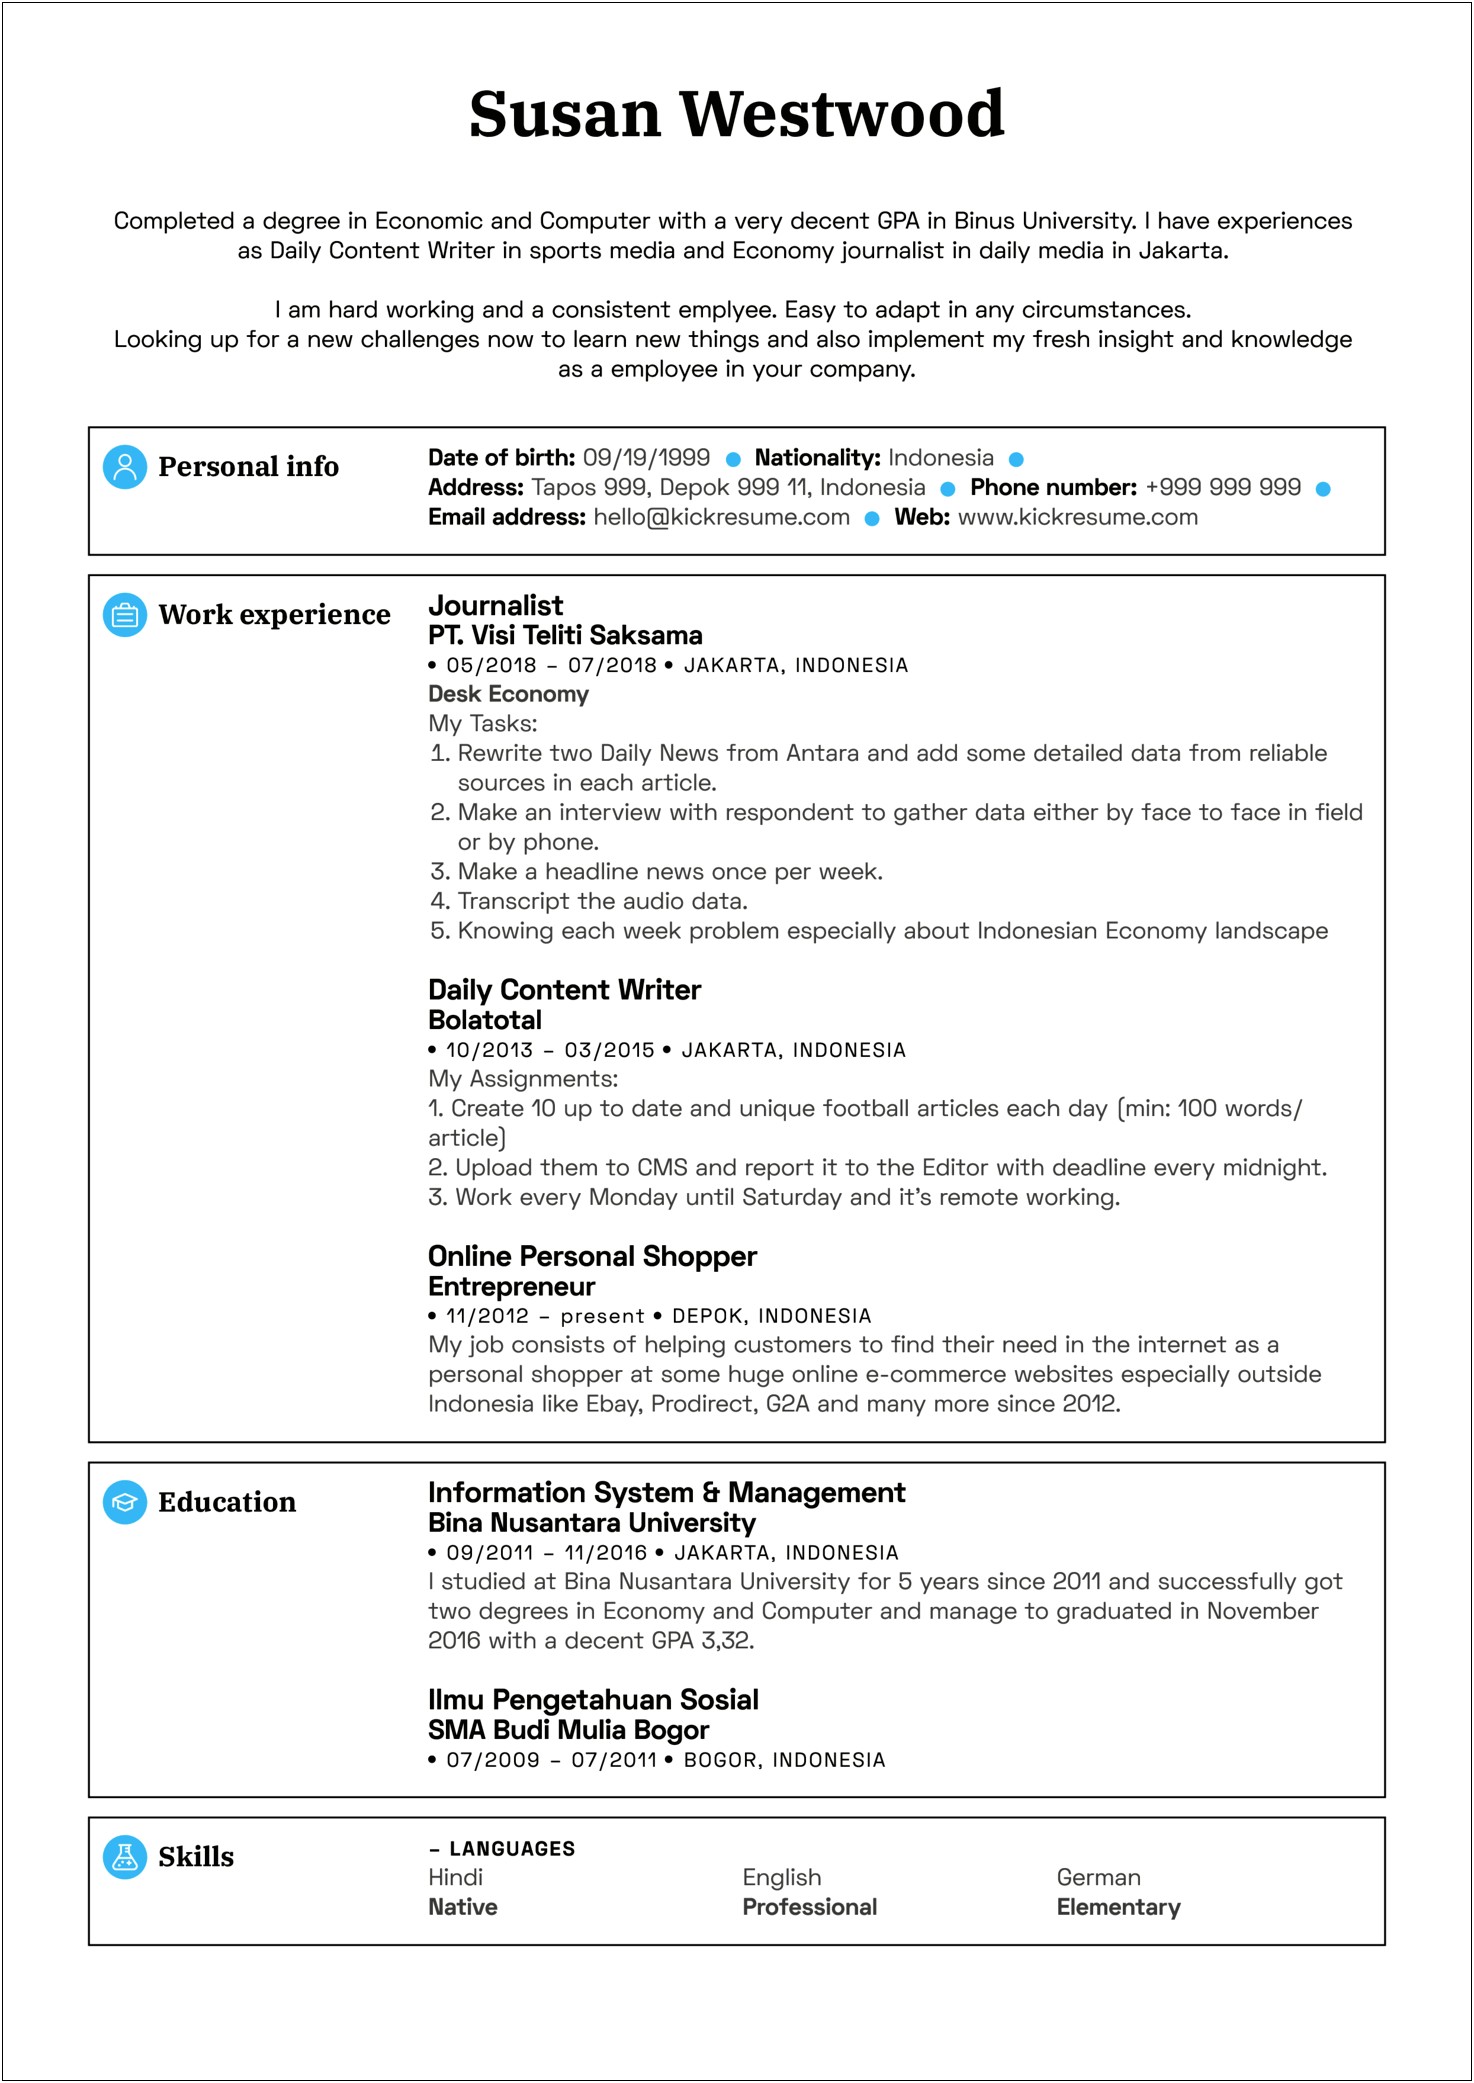 Sample Resume For A Coordinator Position